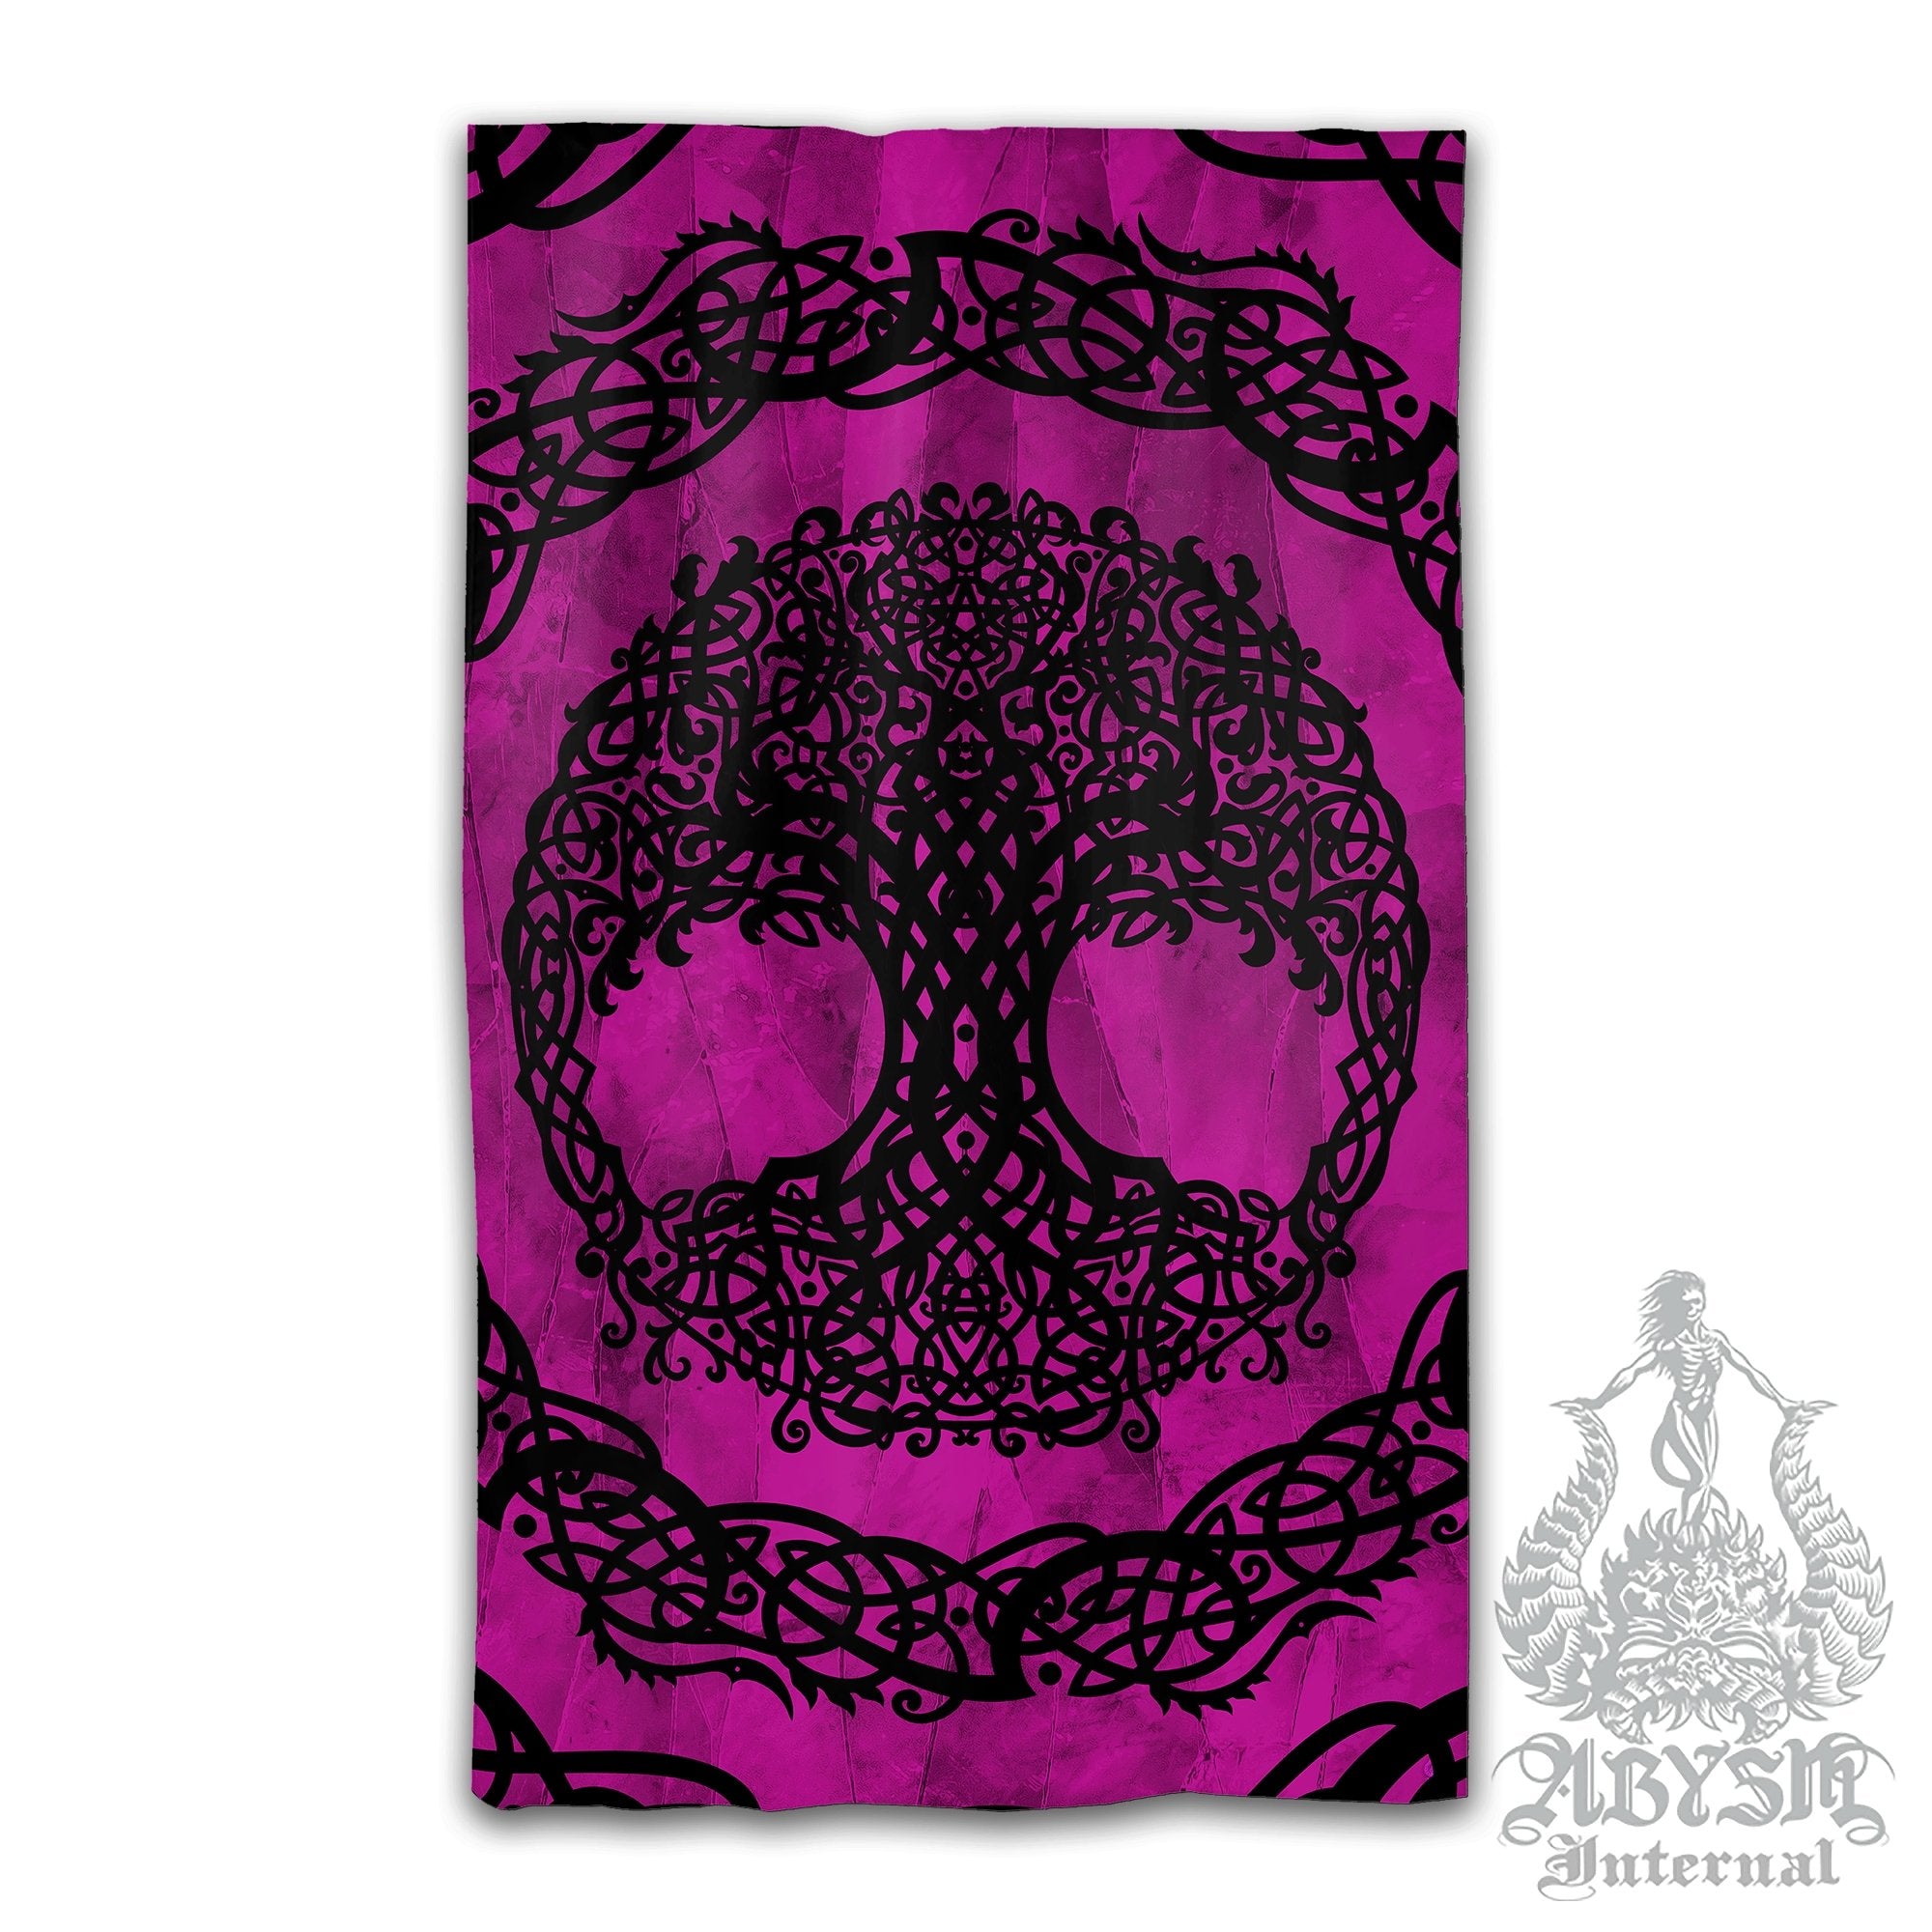 Witchy Blackout Curtains, Long Window Panels, Tree of Life, Celtic Knot, Pagan Room Decor, Wiccan Art Print, Witch Home Decor - Pink and Black - Abysm Internal